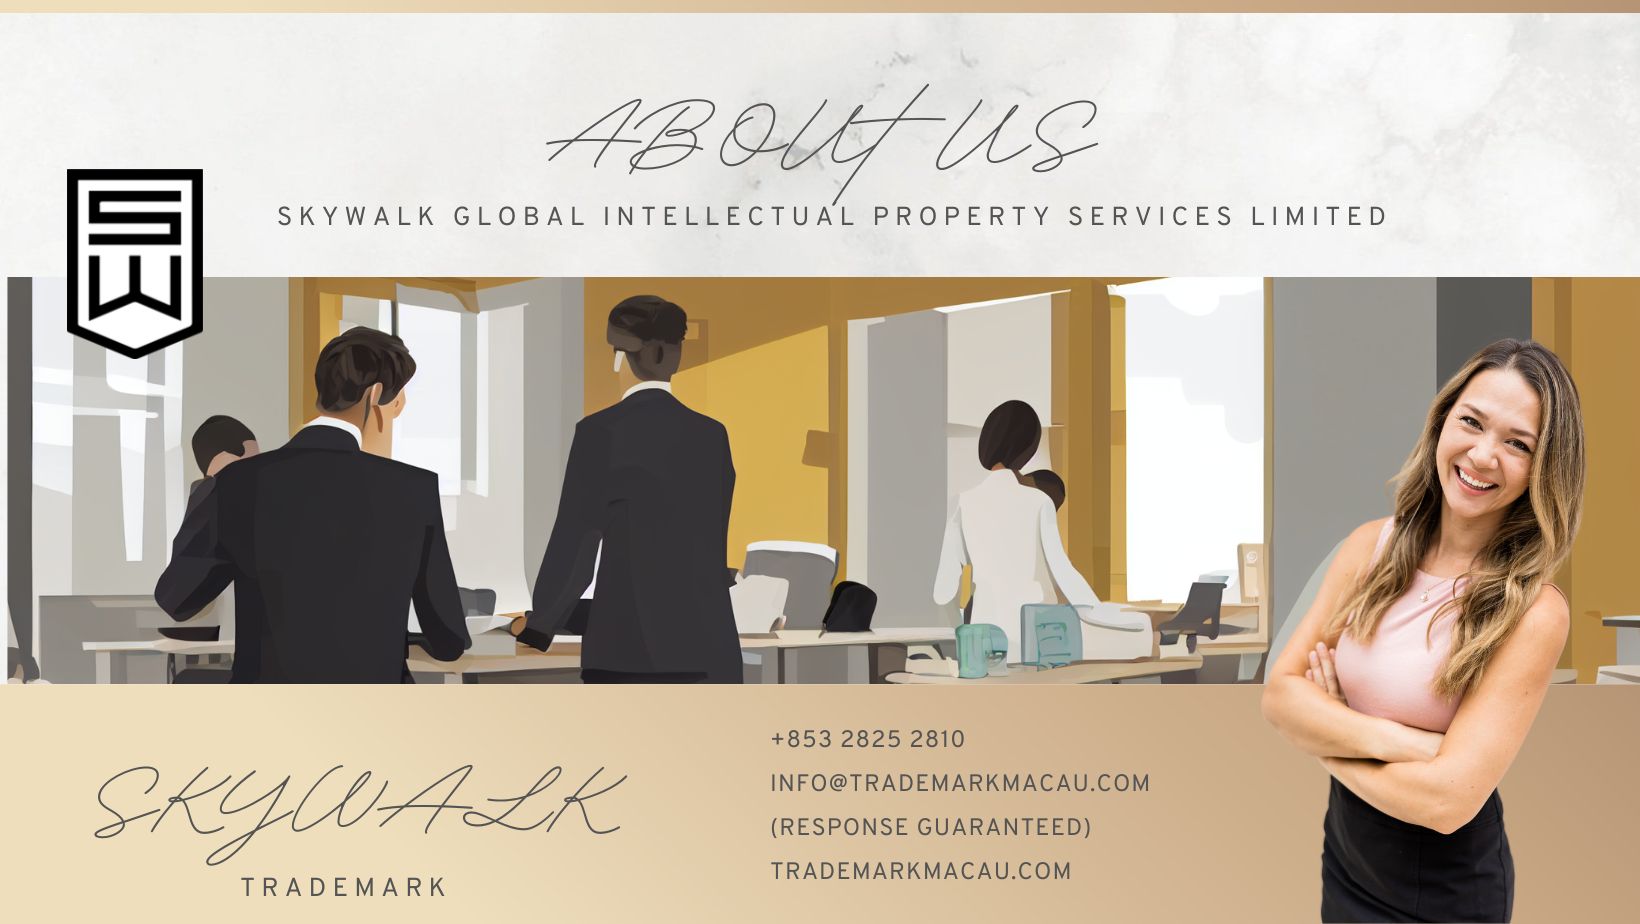 Skywalk Global Intellectual Property Services Limited